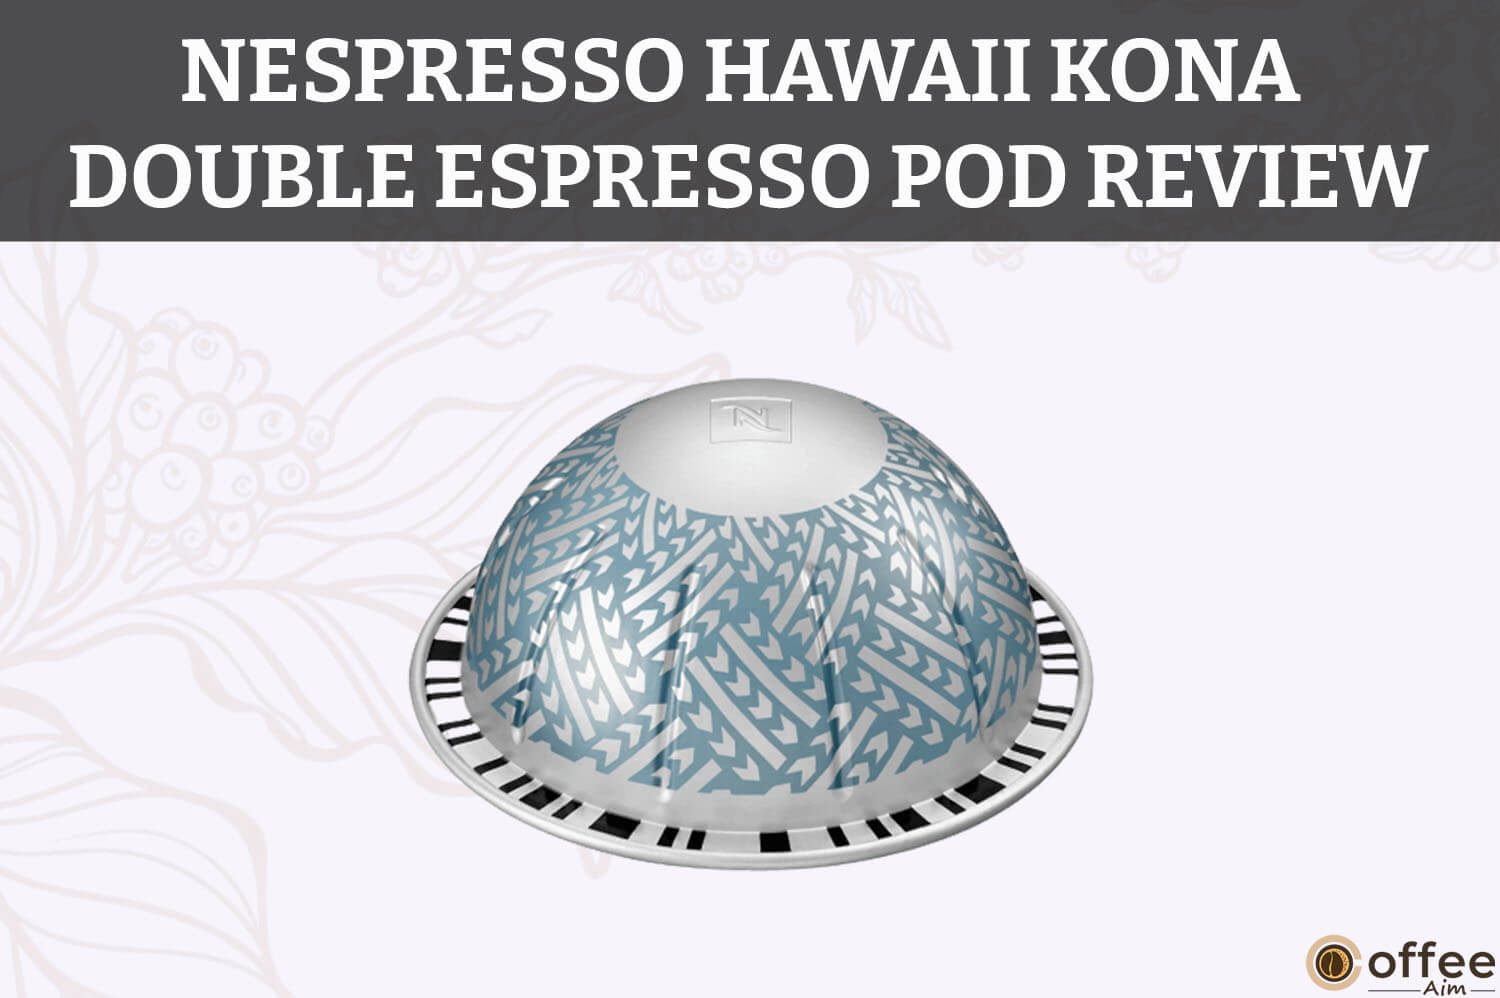 Featured image for the article "Nespresso Hawaii Kona Double Espresso Pod Review"